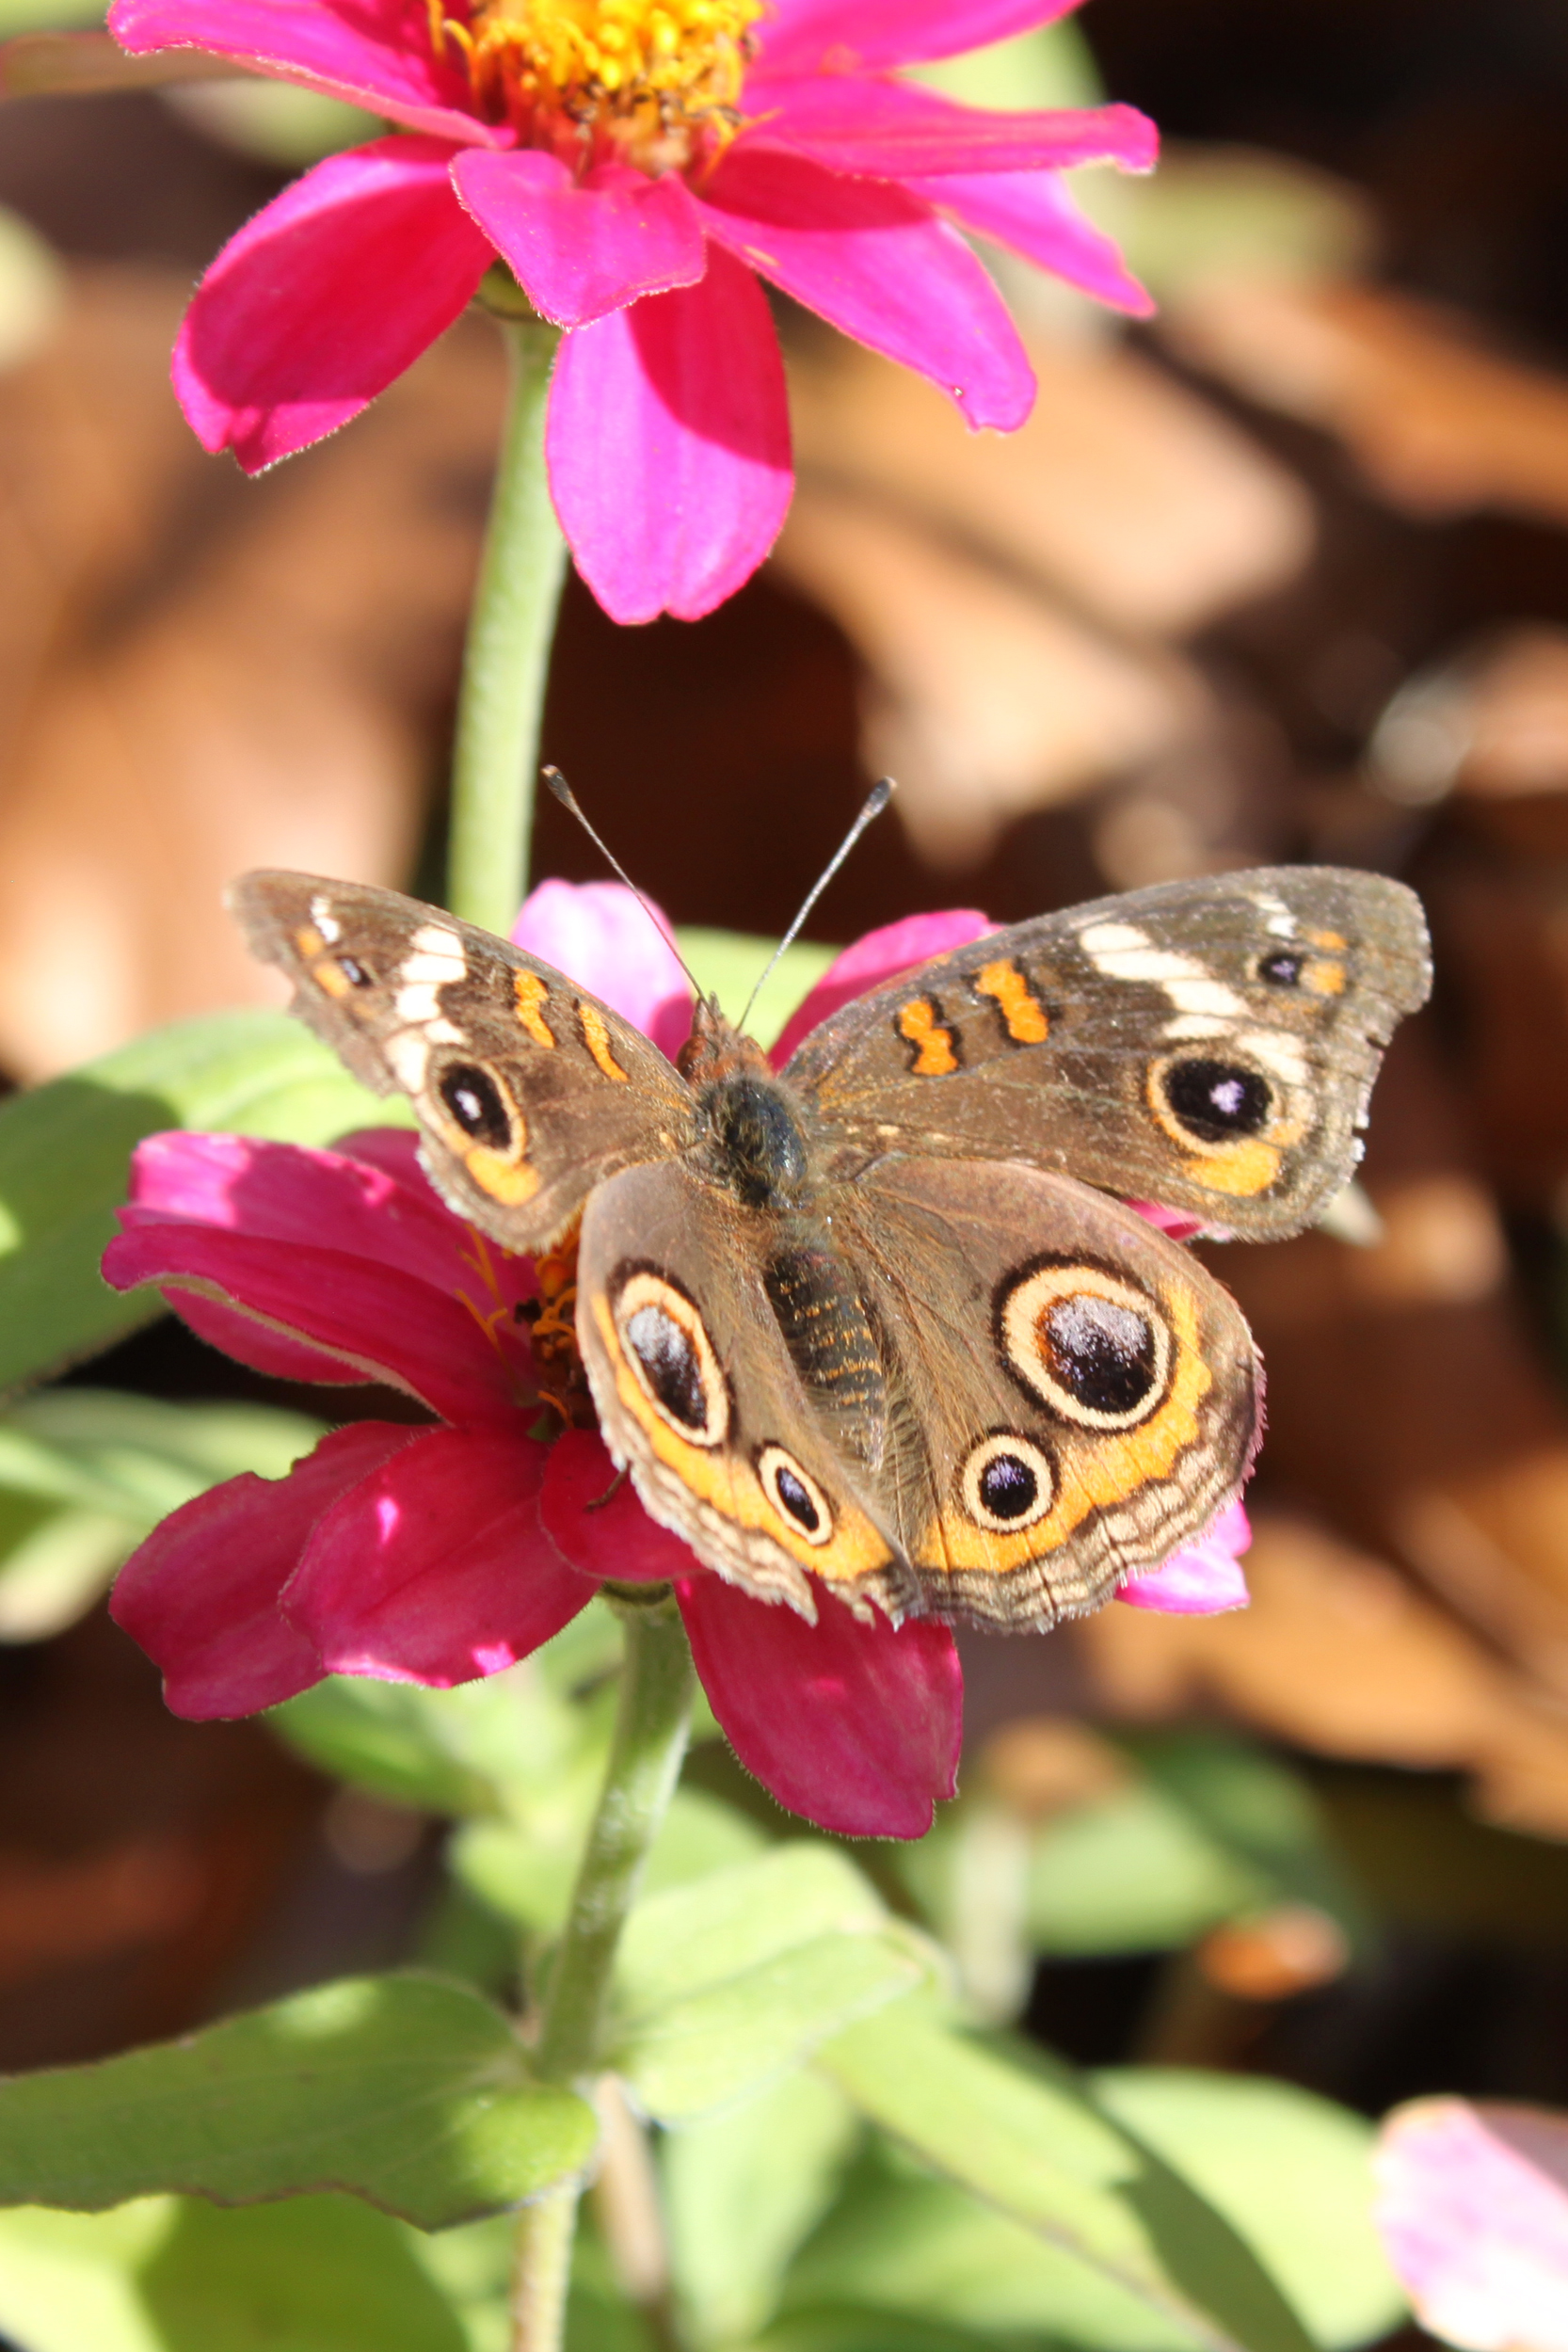 Flower with butterfly photo